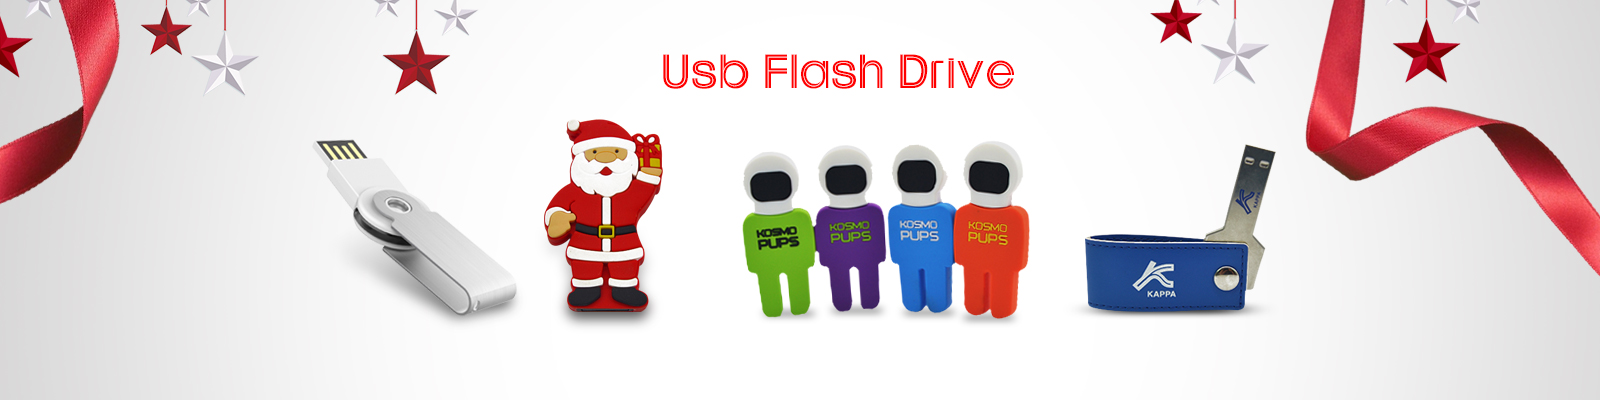 Usb flash drive chip | Usb flash drive without case | leadway group limited